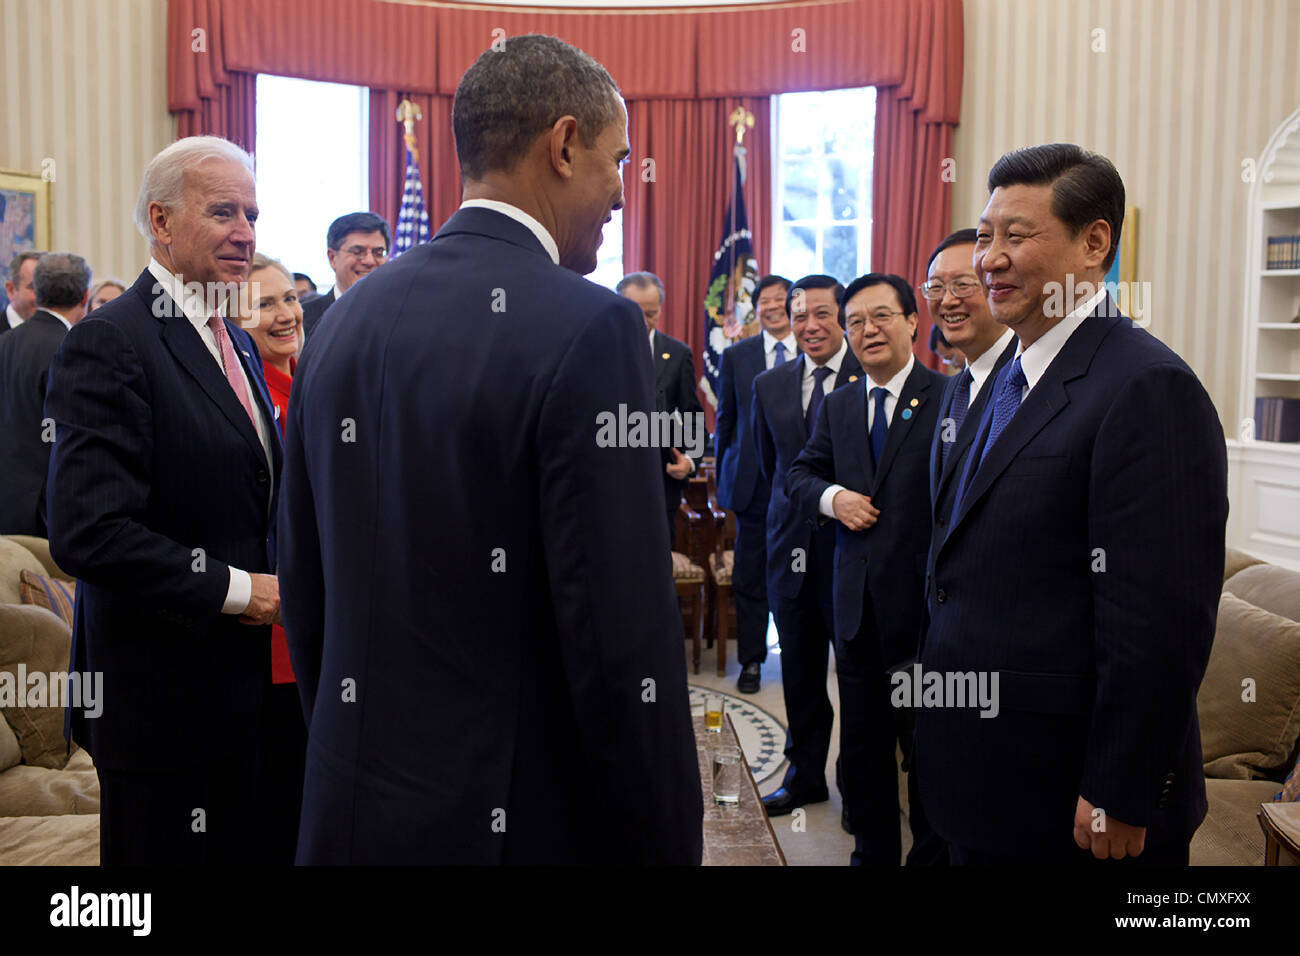 President Barack Obama and Vice President Joe Biden talk with Vice President Xi Jinping of the People’s Republic of China and members of the Chinese delegation following their bilateral meeting in the Oval Office February 14, 2012 in Washington, DC. Stock Photo